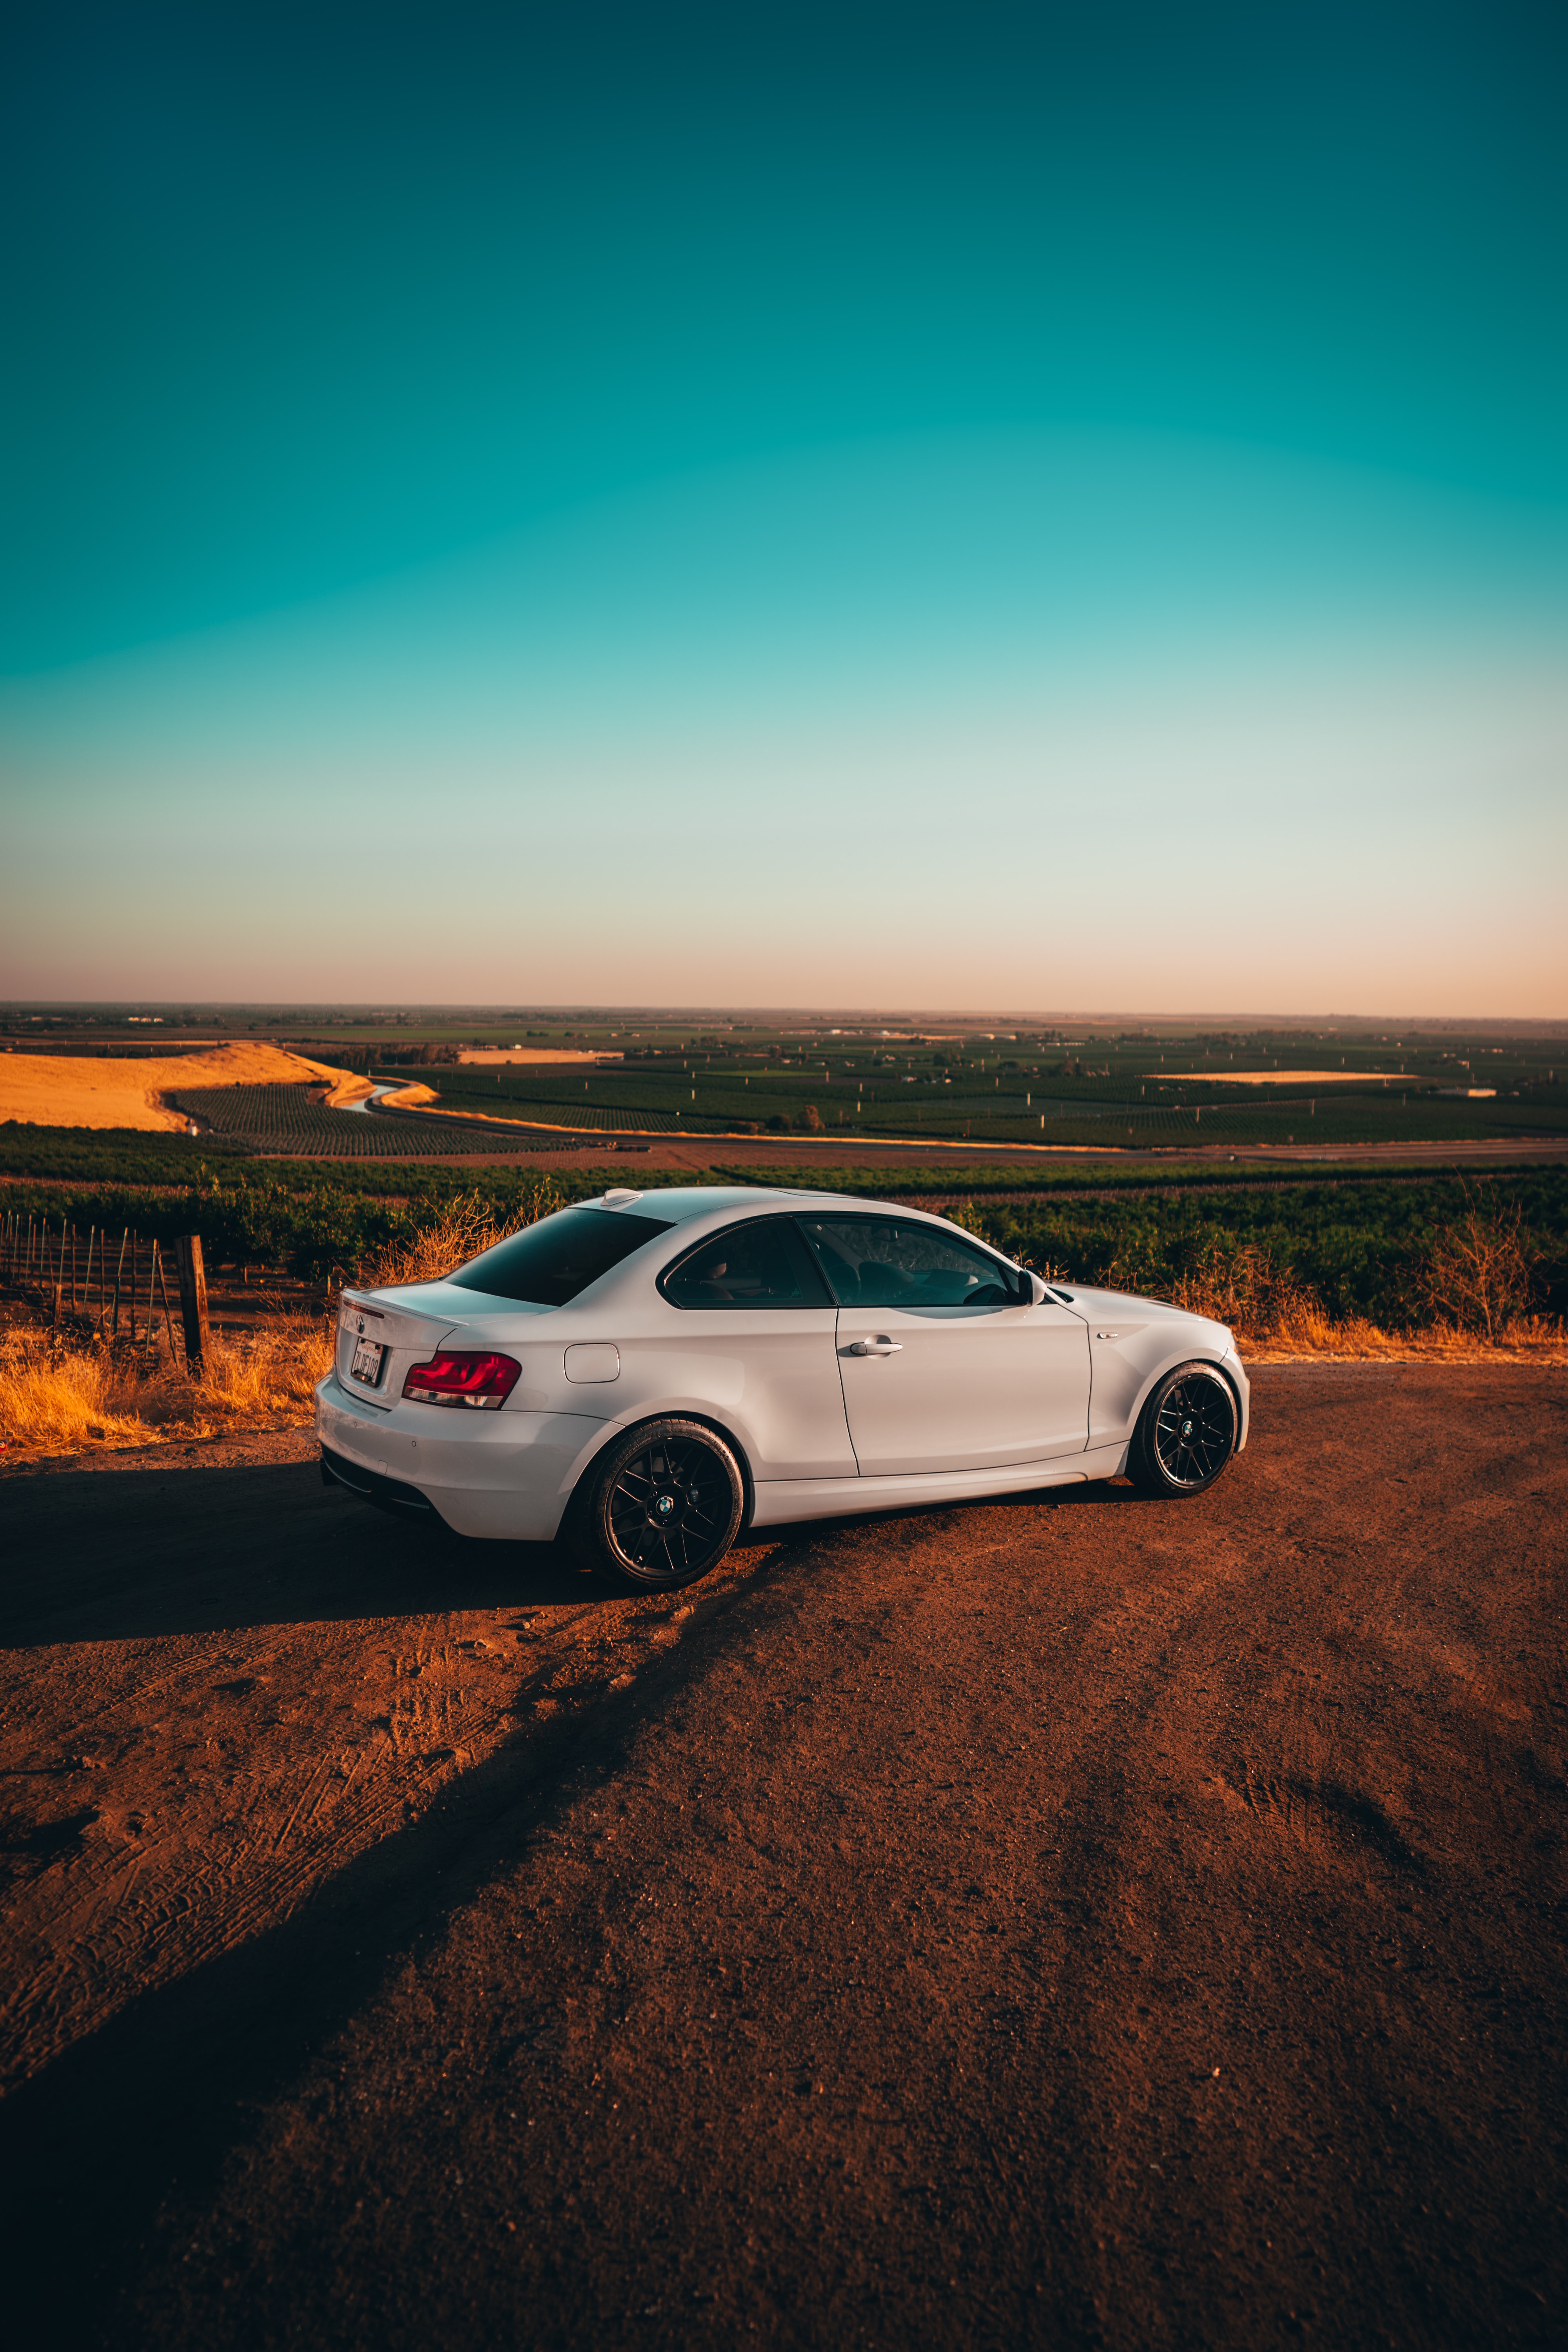 Mobile Wallpaper Bmw side view, cars, field, car